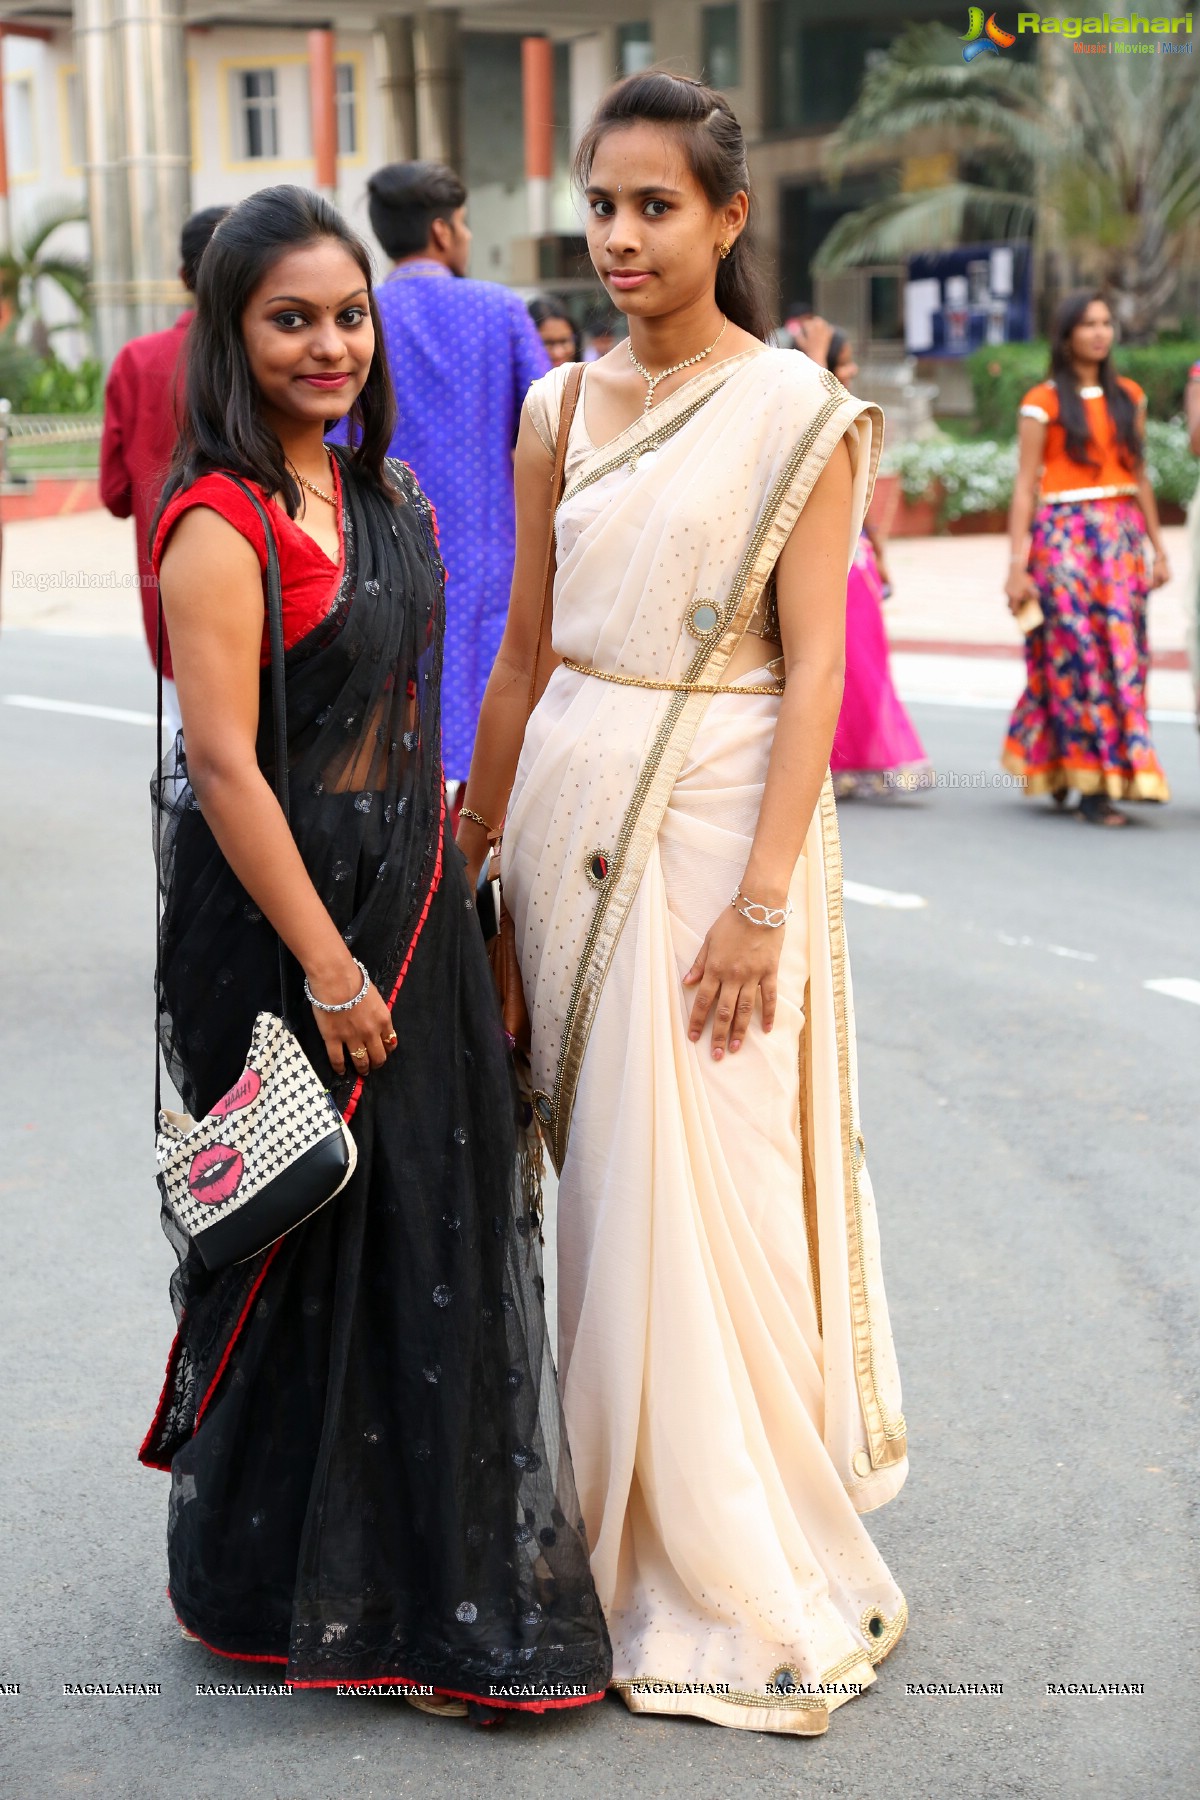 Traditional Day Celebrations at TKR College of Engineering & Technology